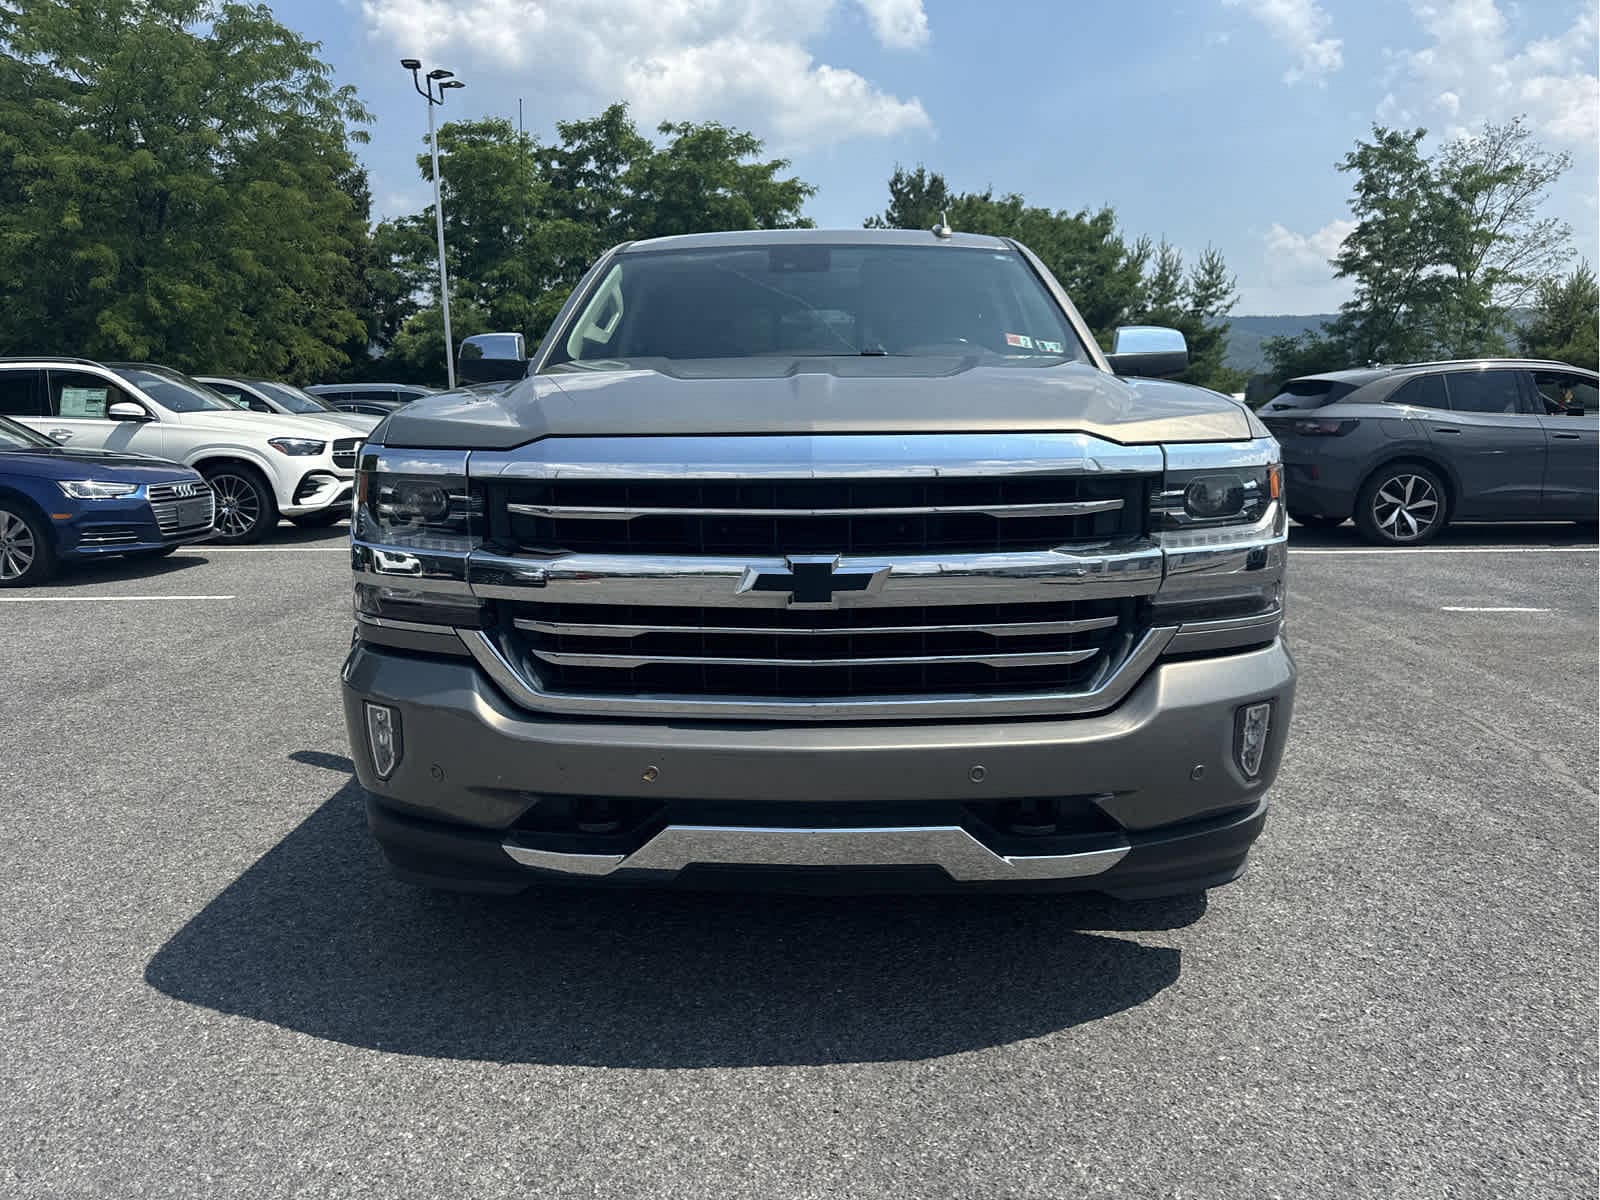 Used 2017 Chevrolet Silverado 1500 High Country with VIN 3GCUKTEC9HG321963 for sale in State College, PA